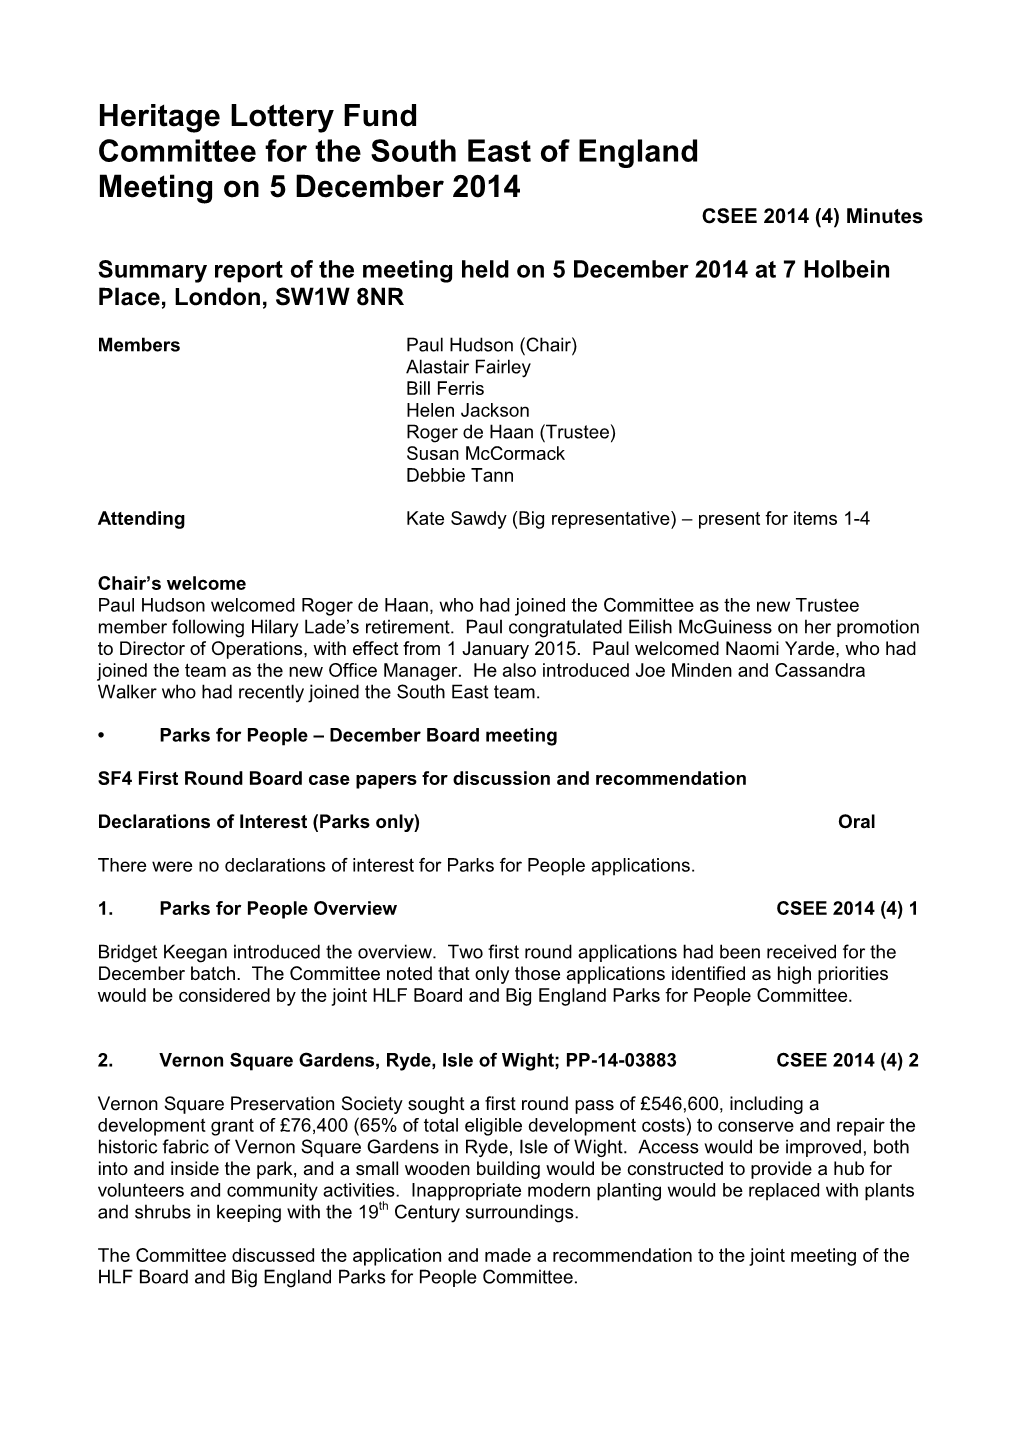 Heritage Lottery Fund Committee for the South East of England Meeting on 5 December 2014 CSEE 2014 (4) Minutes